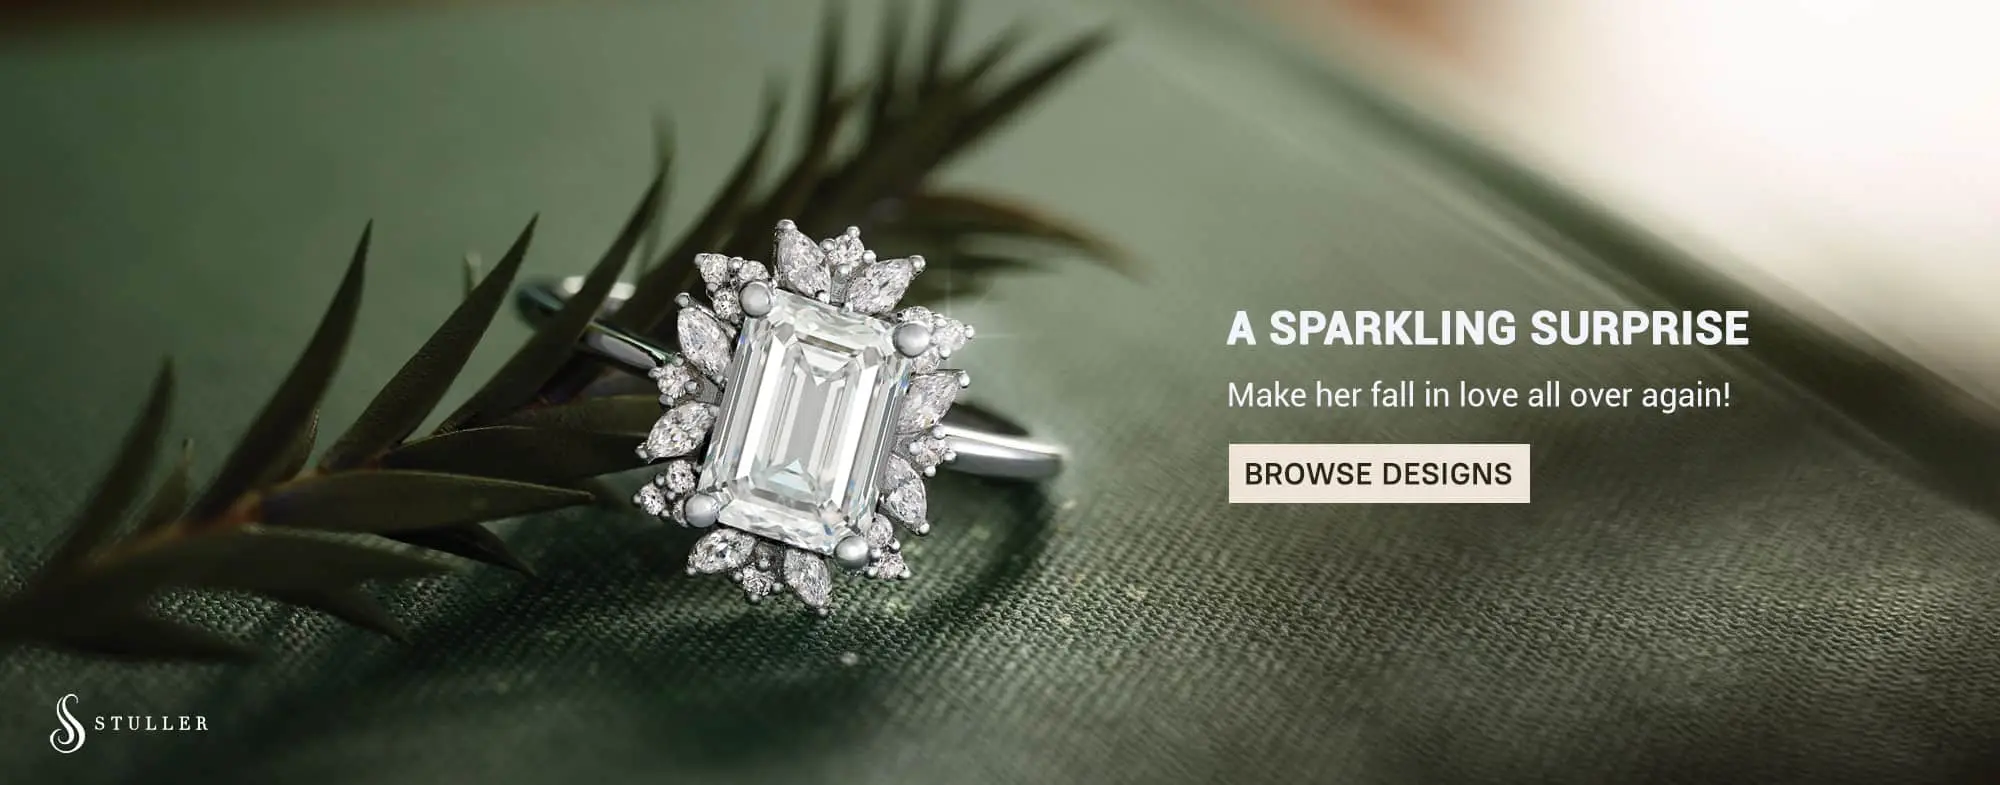 Stuller Engagement Rings at Carter’s Jewelers